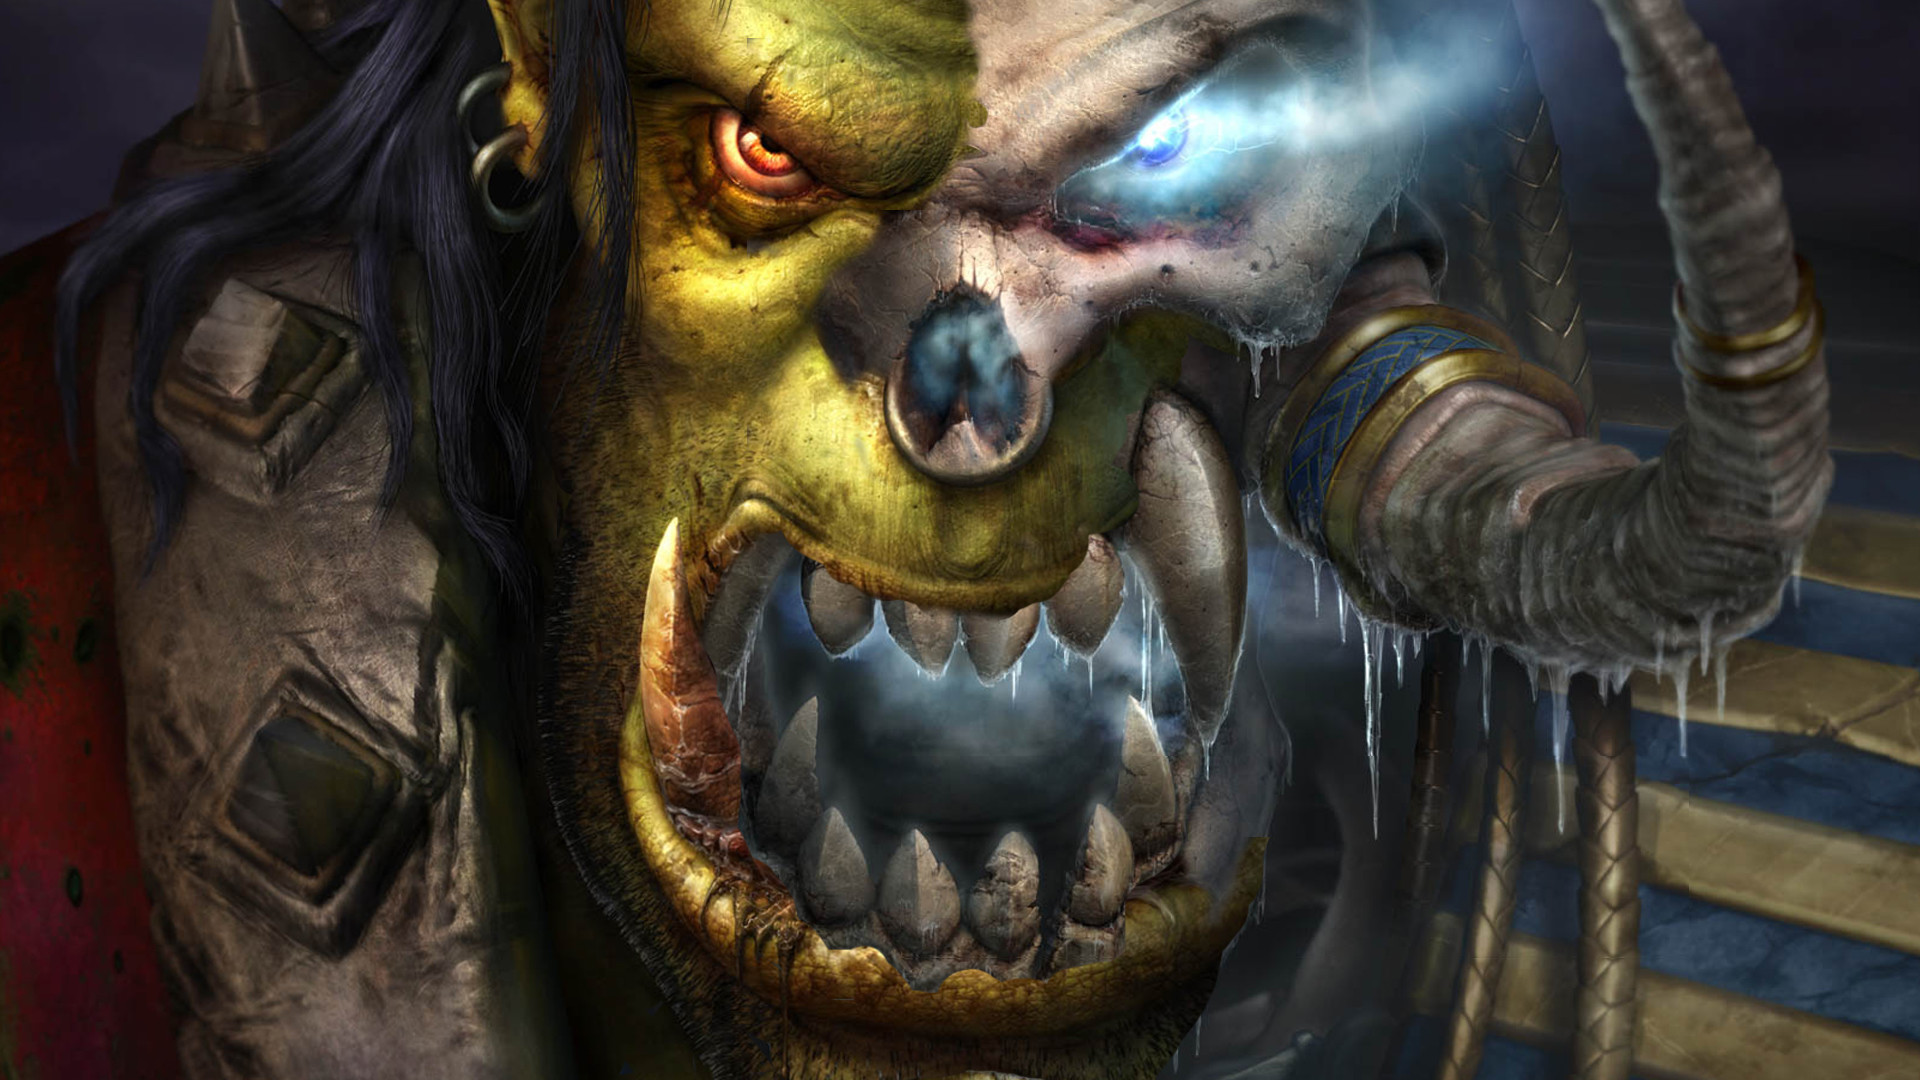 1920x1080 ... Warcraft3 Undead Undead Orc Wallpaper by slimebuck